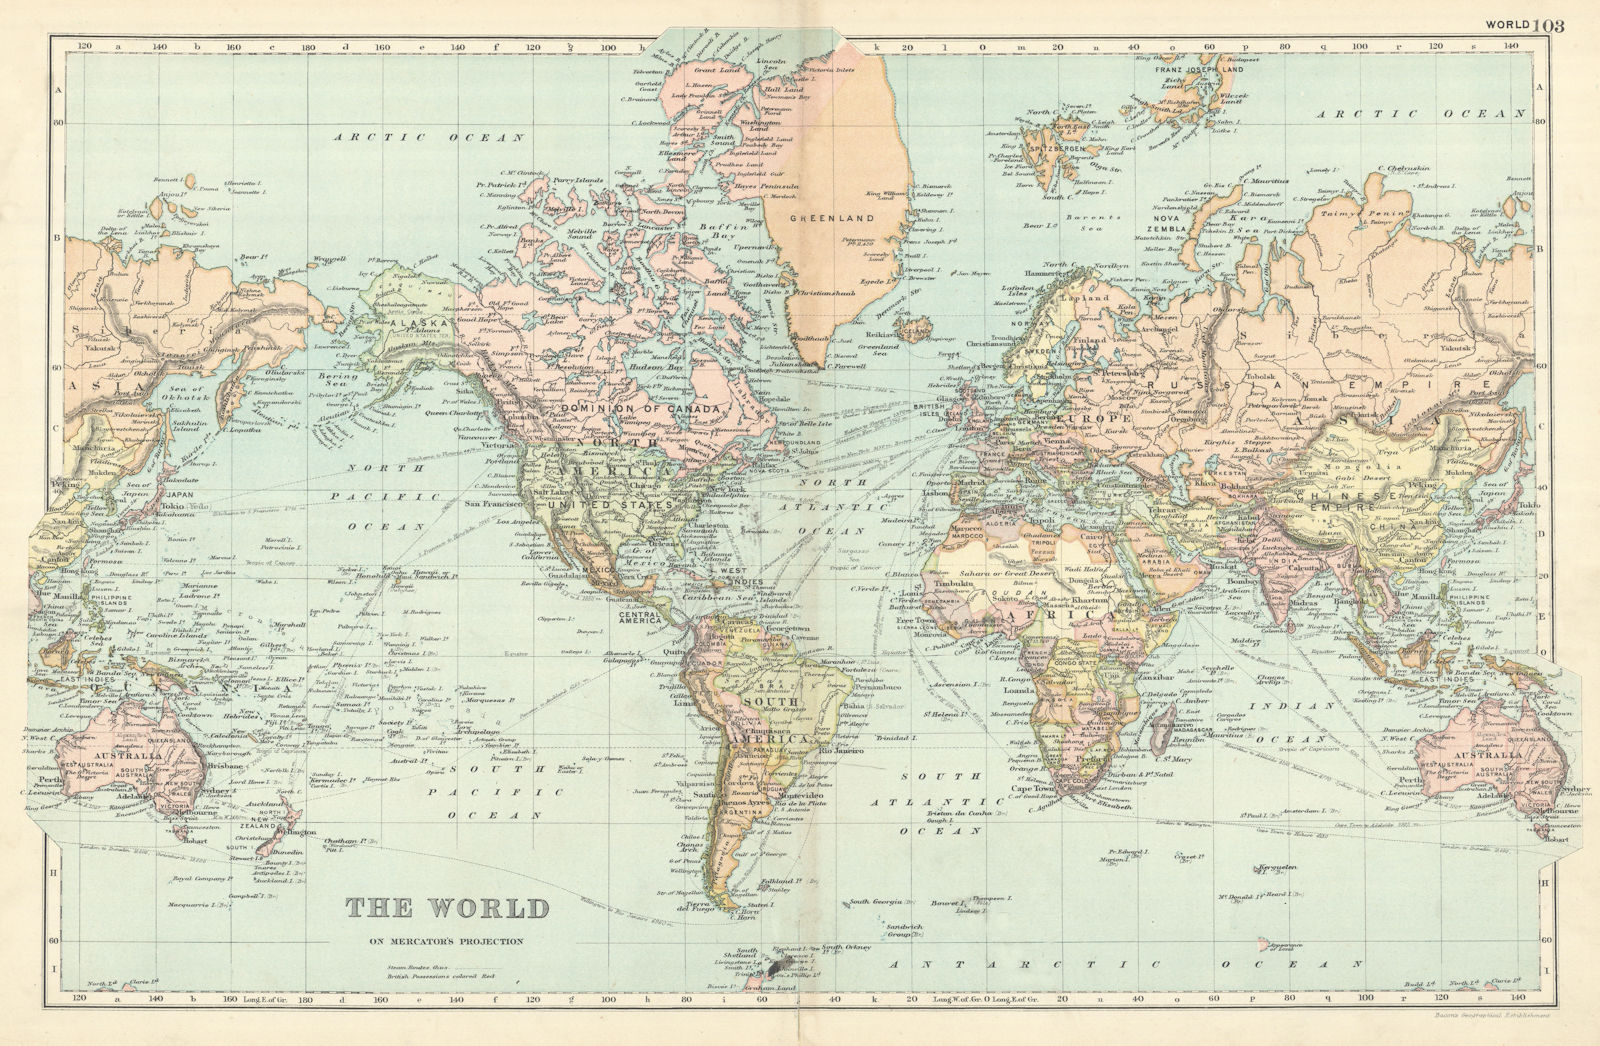 WORLD ON MERCATOR'S PROJECTION showing the BRITISH EMPIRE by GW BACON 1898 map